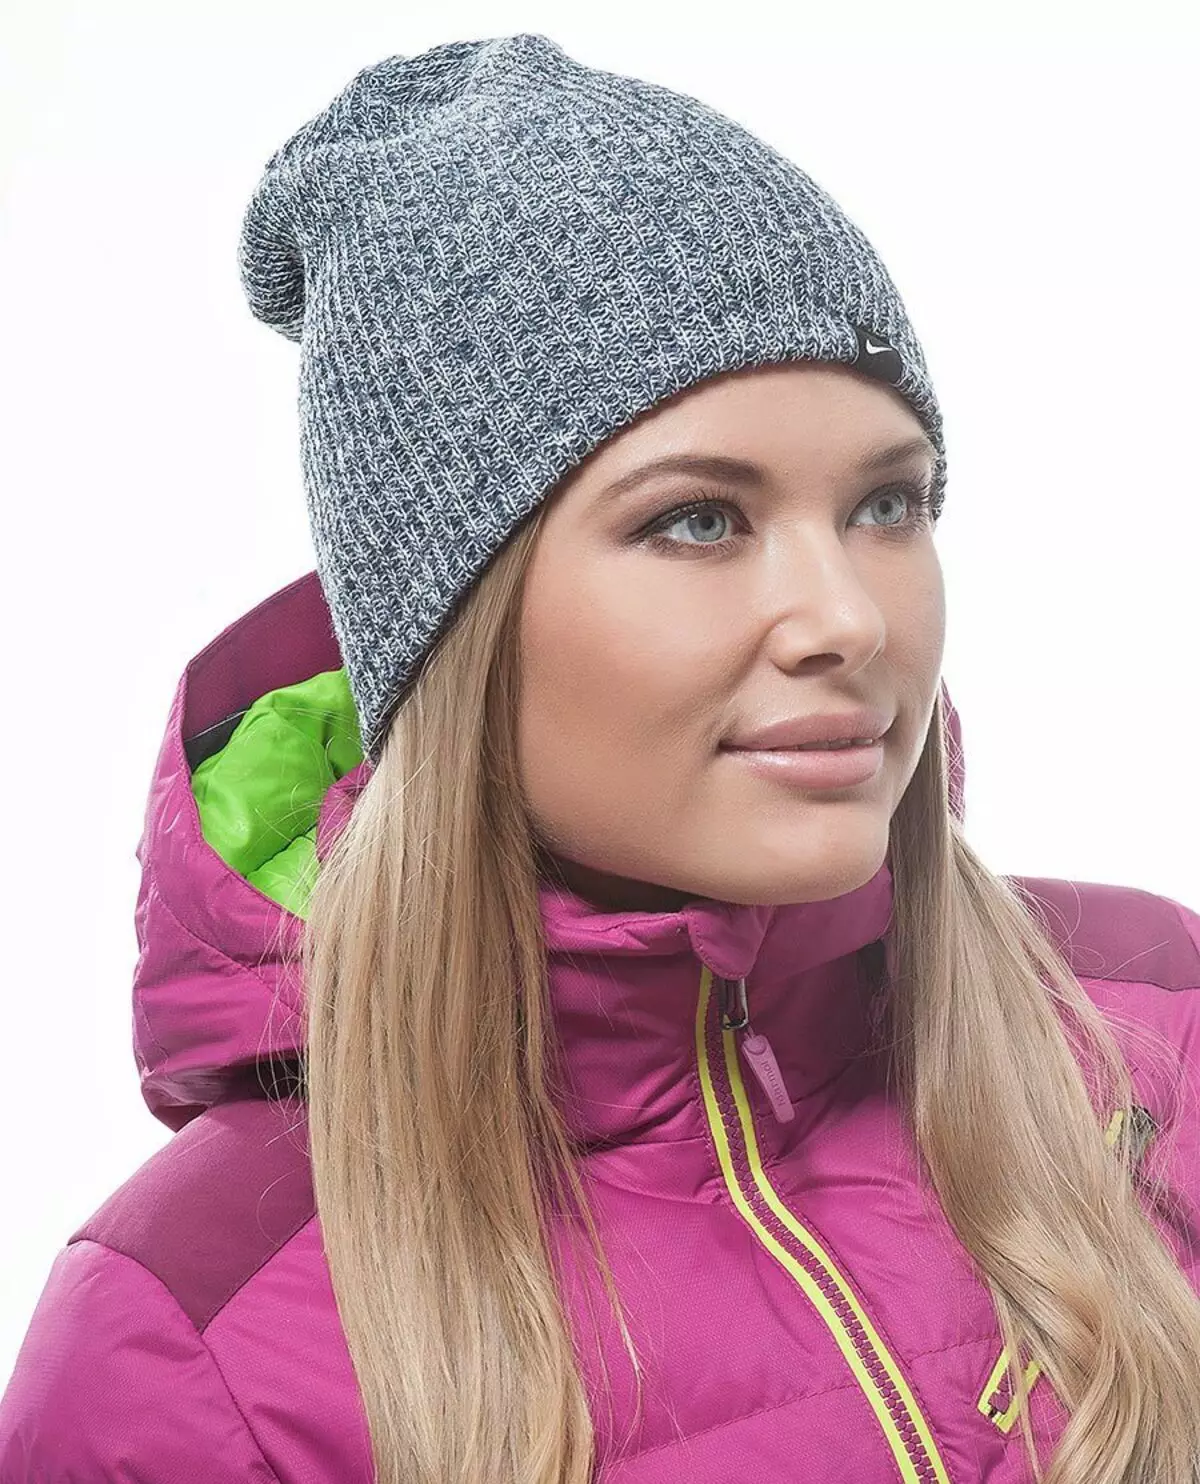 Sports caps (105 photos): Brand The North Face, Women's and Men's Knitted Models 2021, with Pompon, Fashion Hats of Ushanki 2966_53